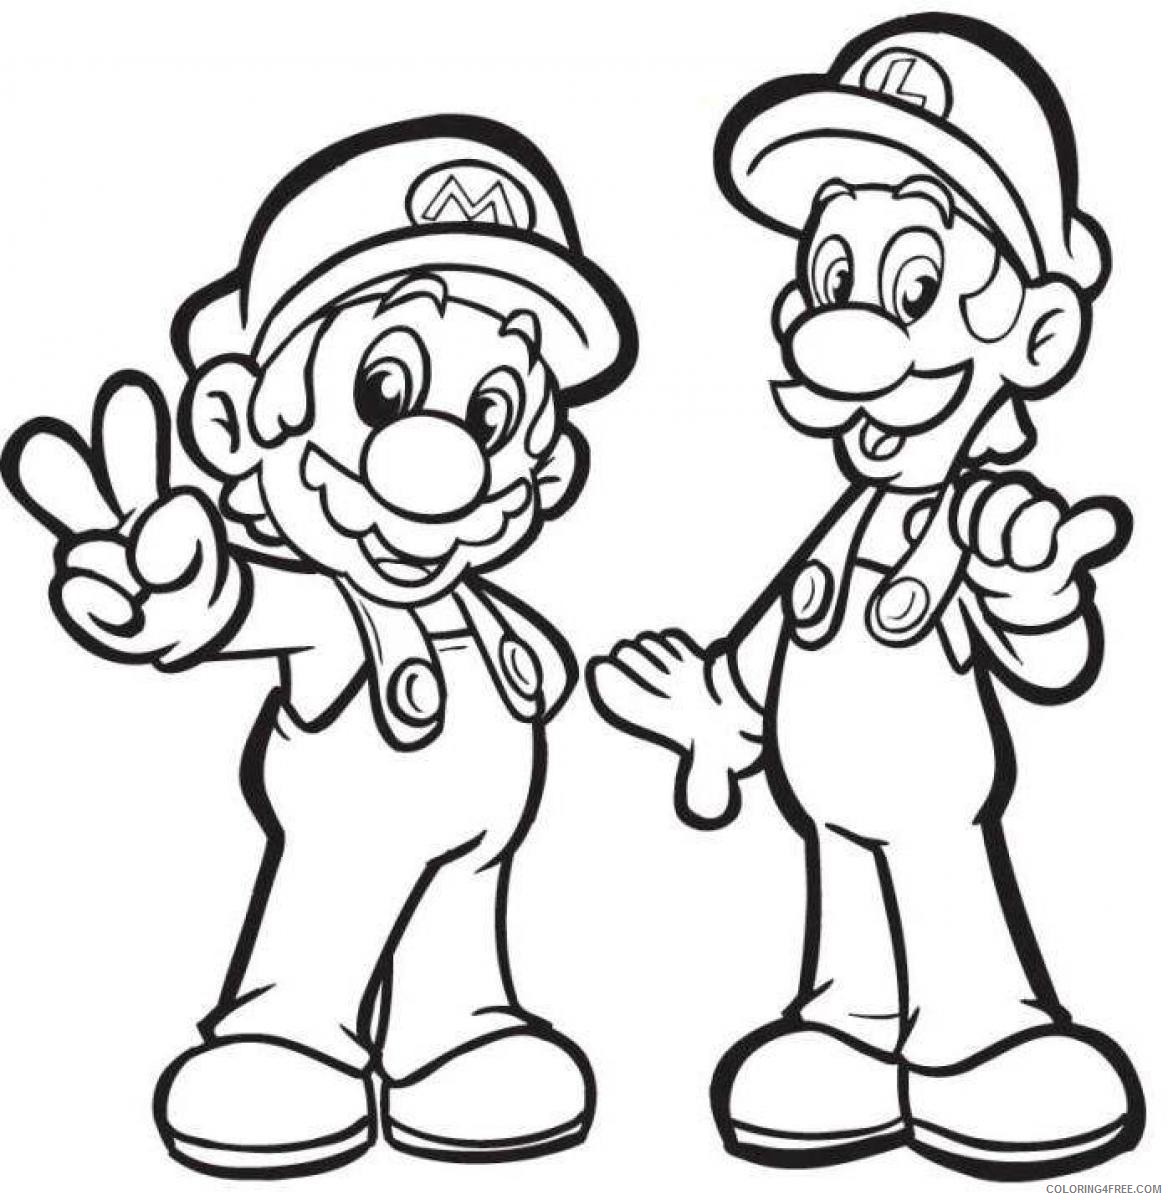 mario and luigi coloring pages Coloring4free